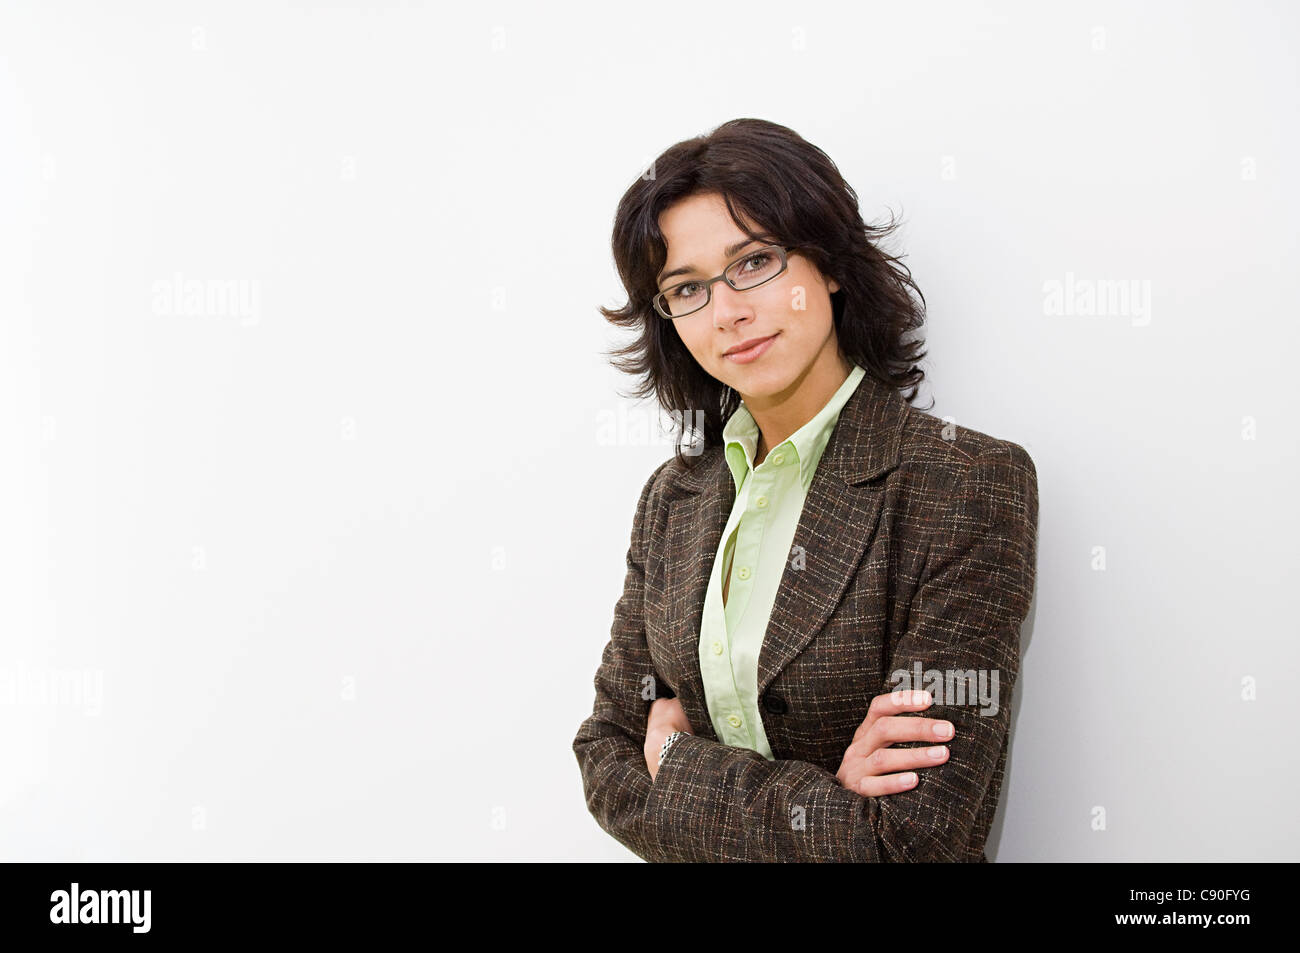 Businesswoman with arms crossed, portrait Stock Photo